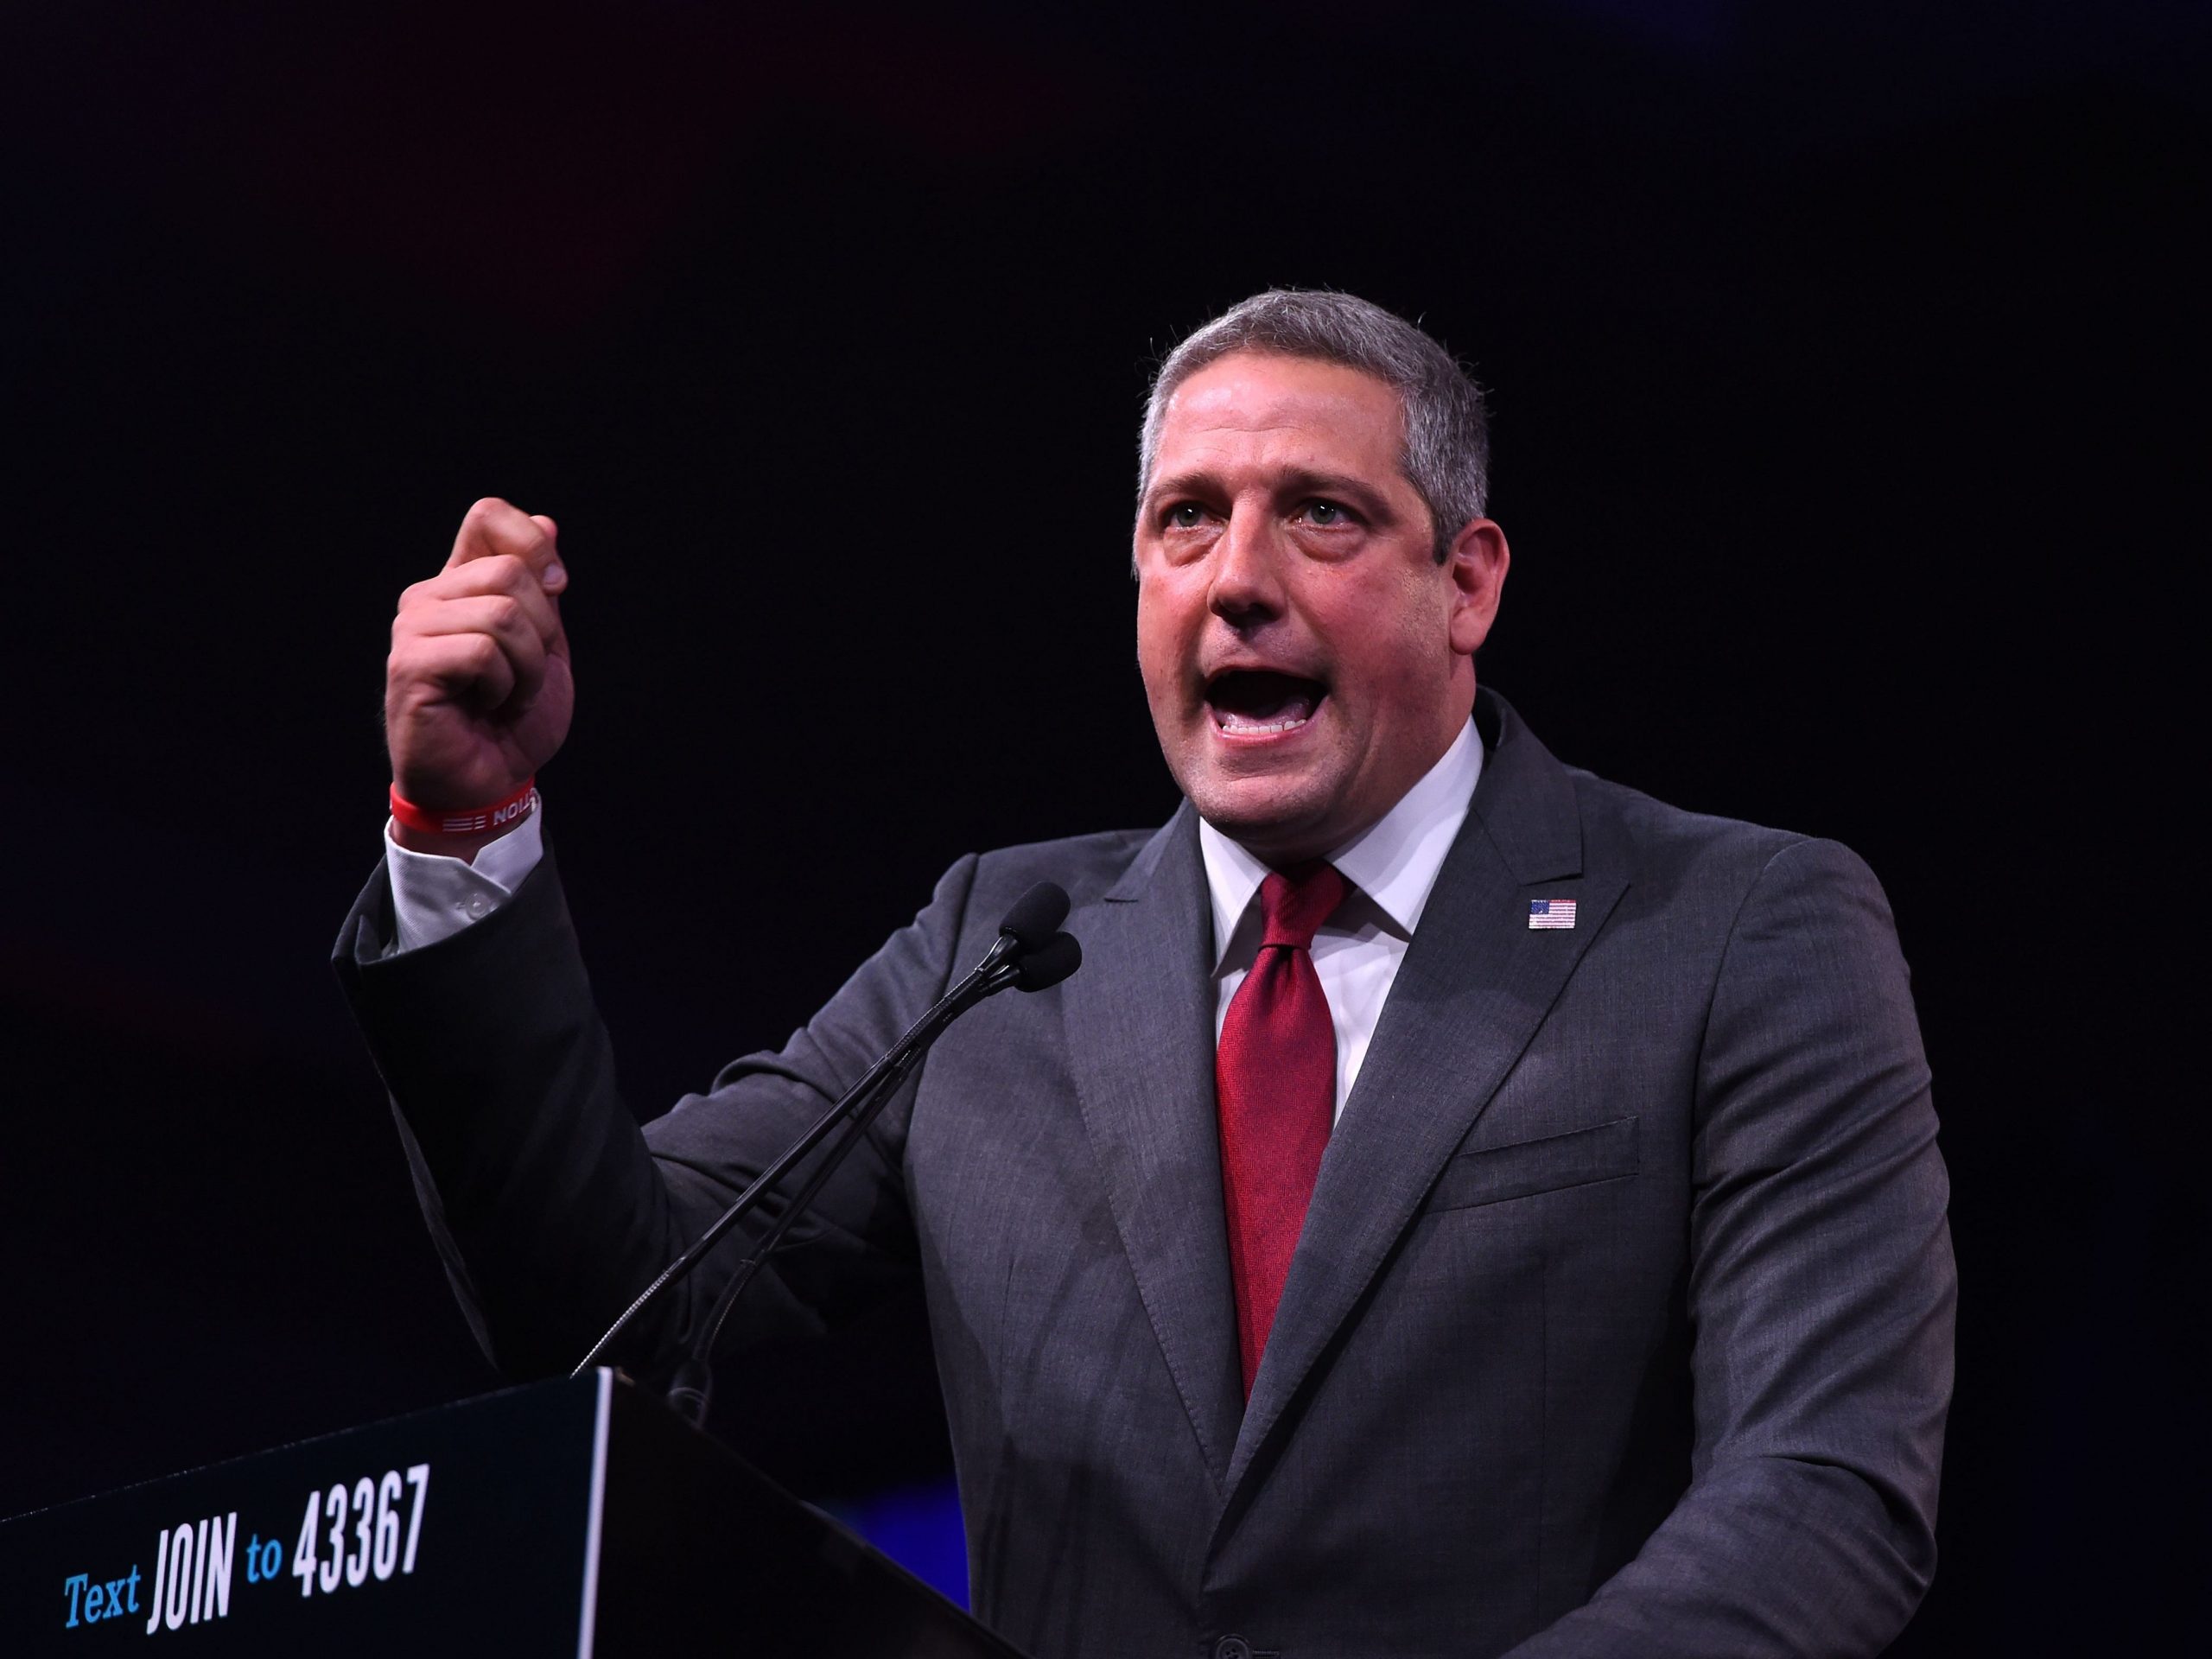 Tim Ryan wears a gray suit and red tie as he delivers an impassioned speech